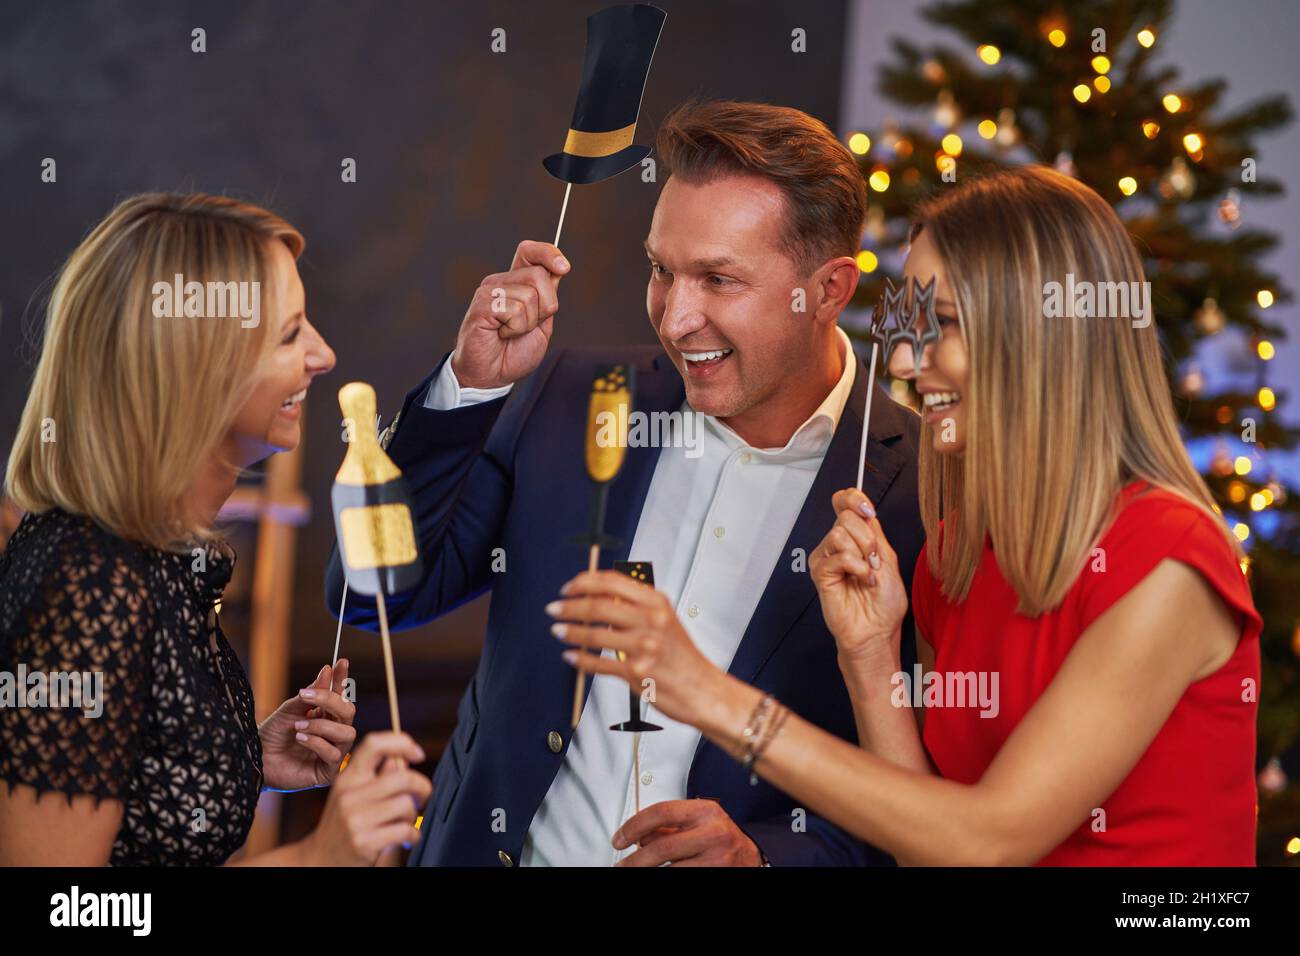 Business friends celebrating christmas party Stock Photo